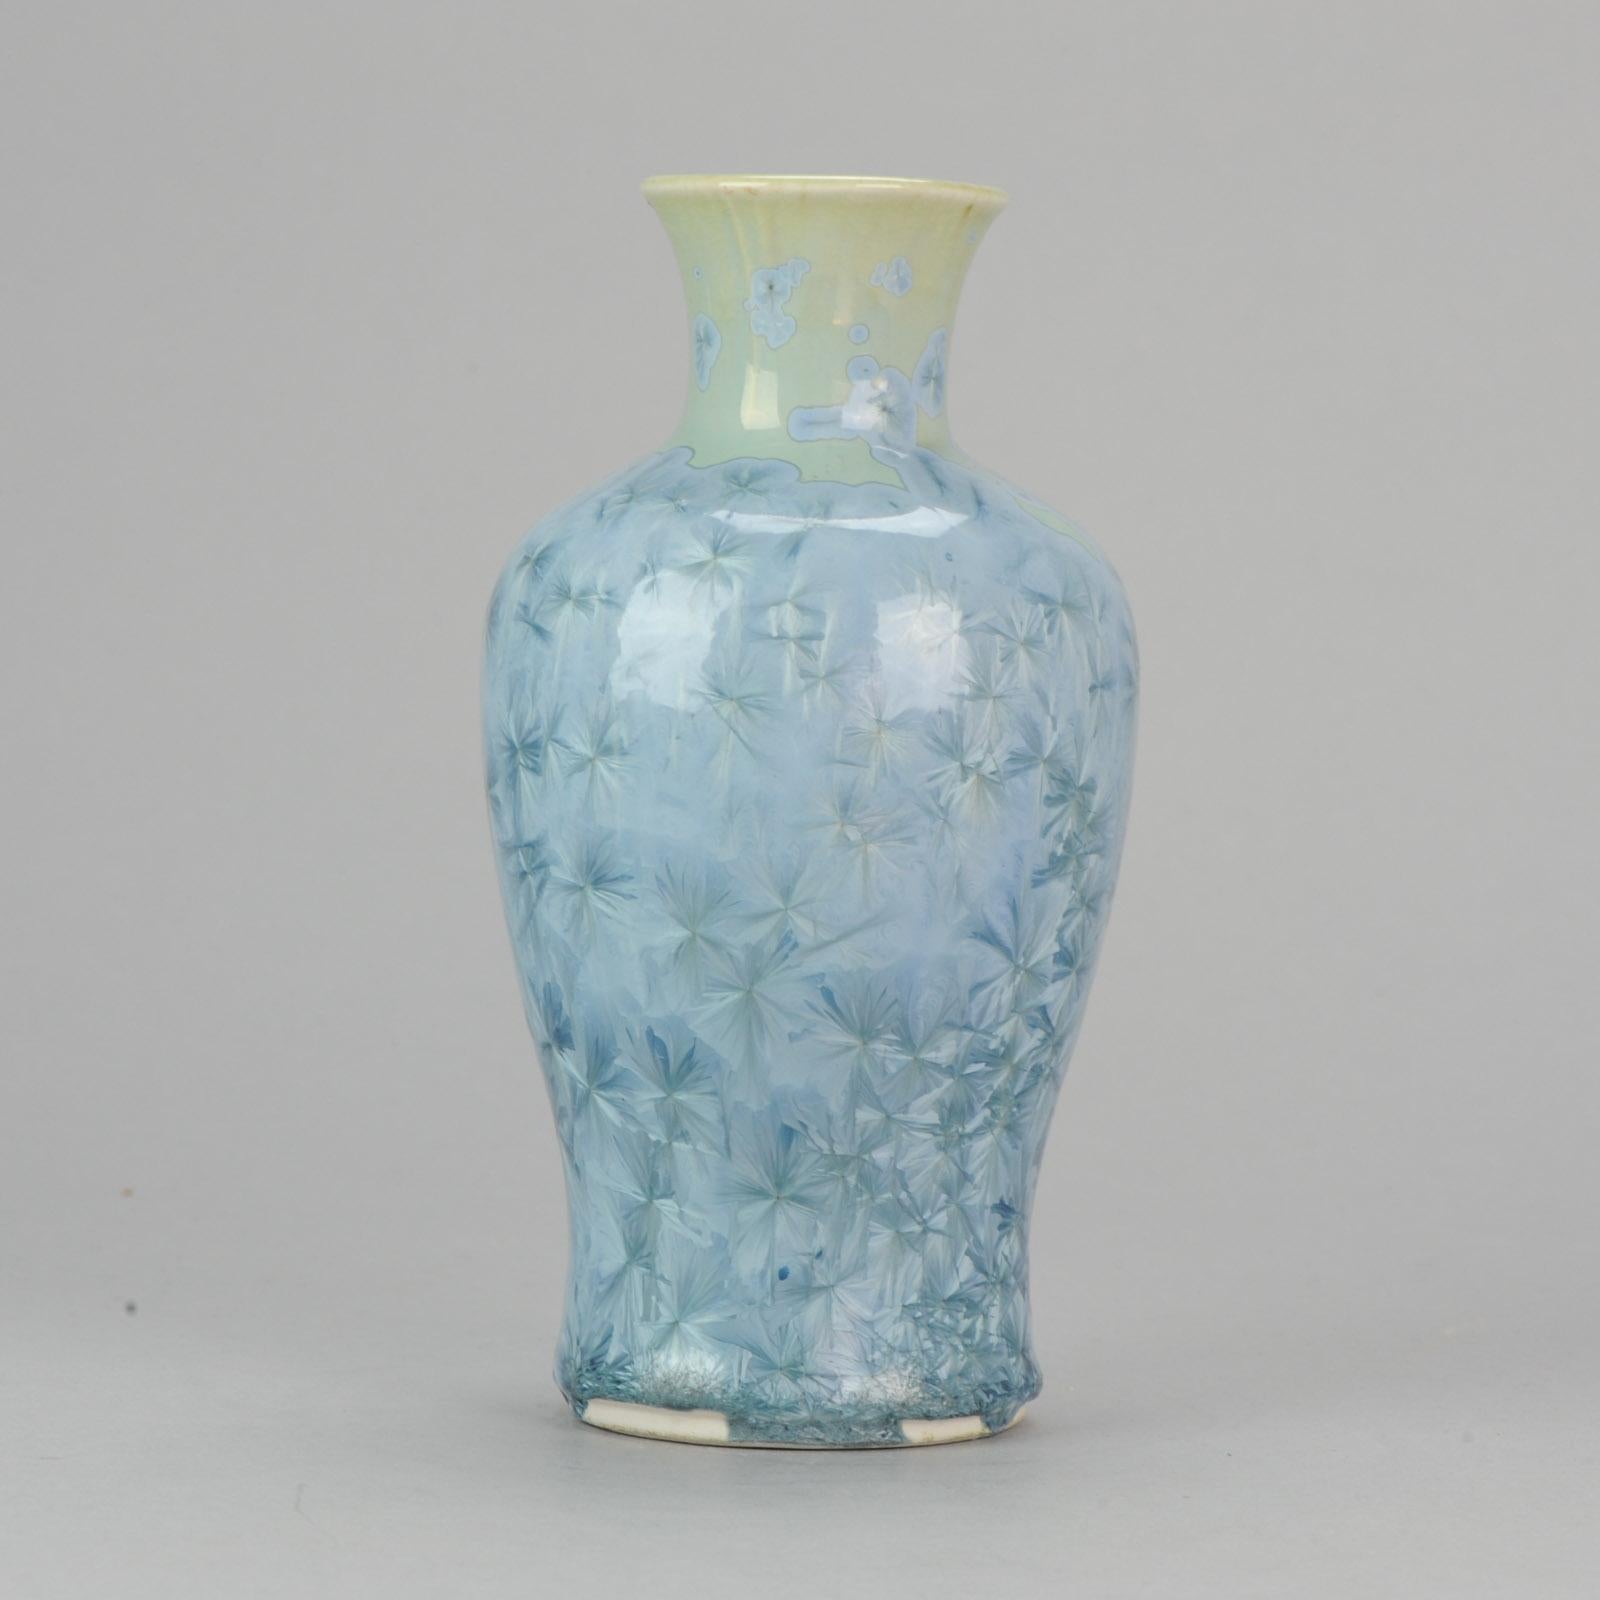 Very nice vase, high quality. Innovative crystalline glaze used in Shiwan in the 1970s-1980s. A true masterpiece. This is the antique of the future.

Provenance: Bought in the 1982 in China. Afterwards exhibited and on loan to the Leiden Museum of